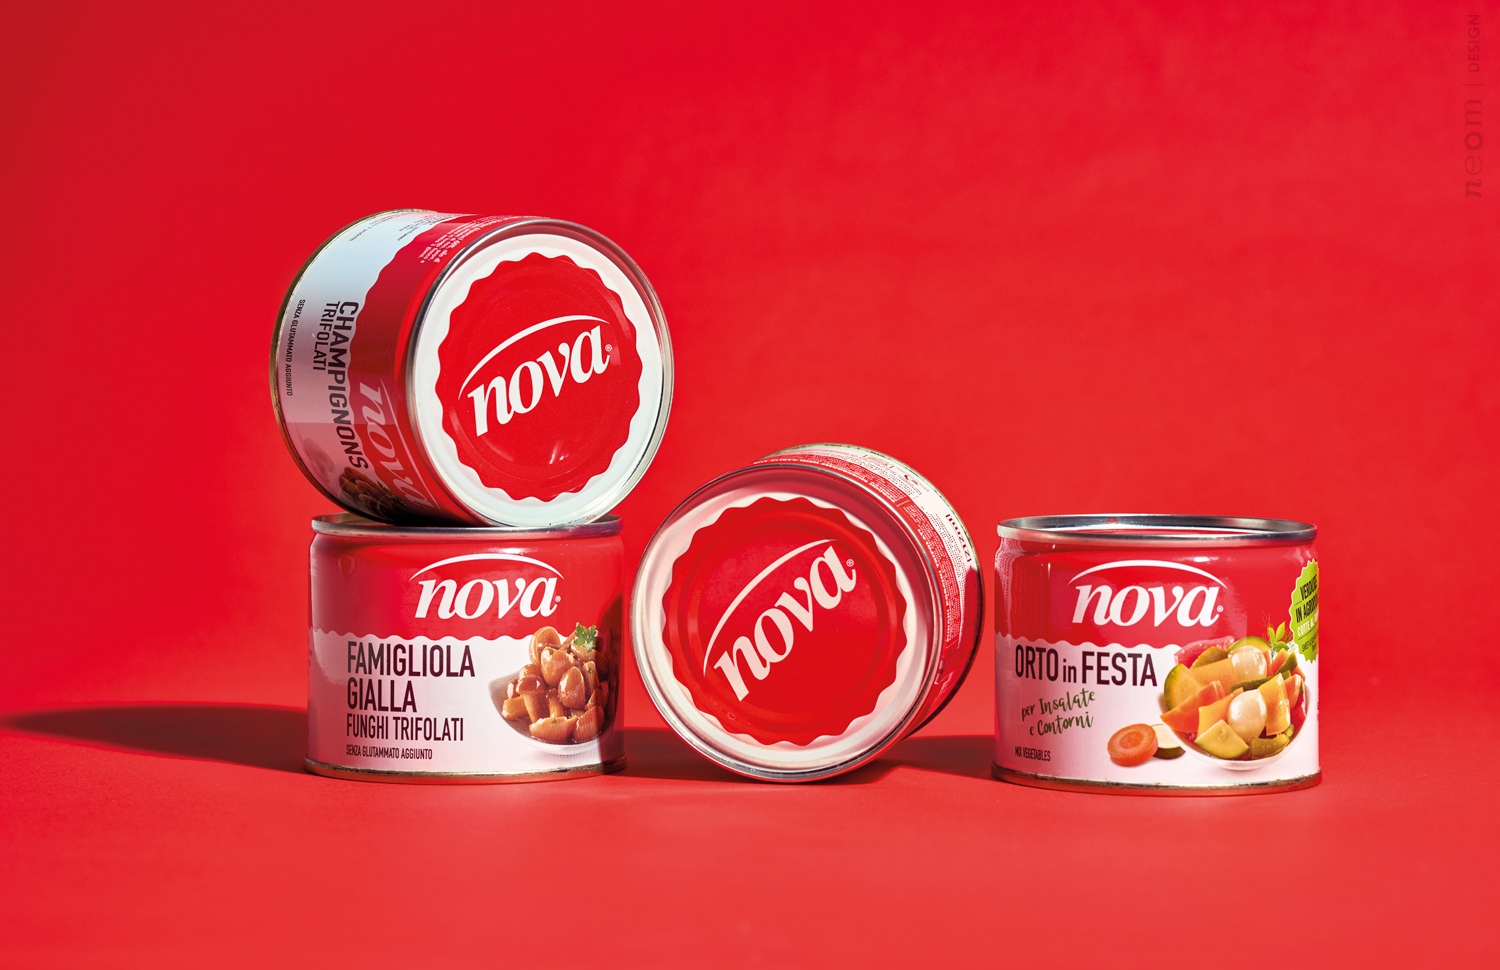 Nova Brand and Packaging System Relaunch